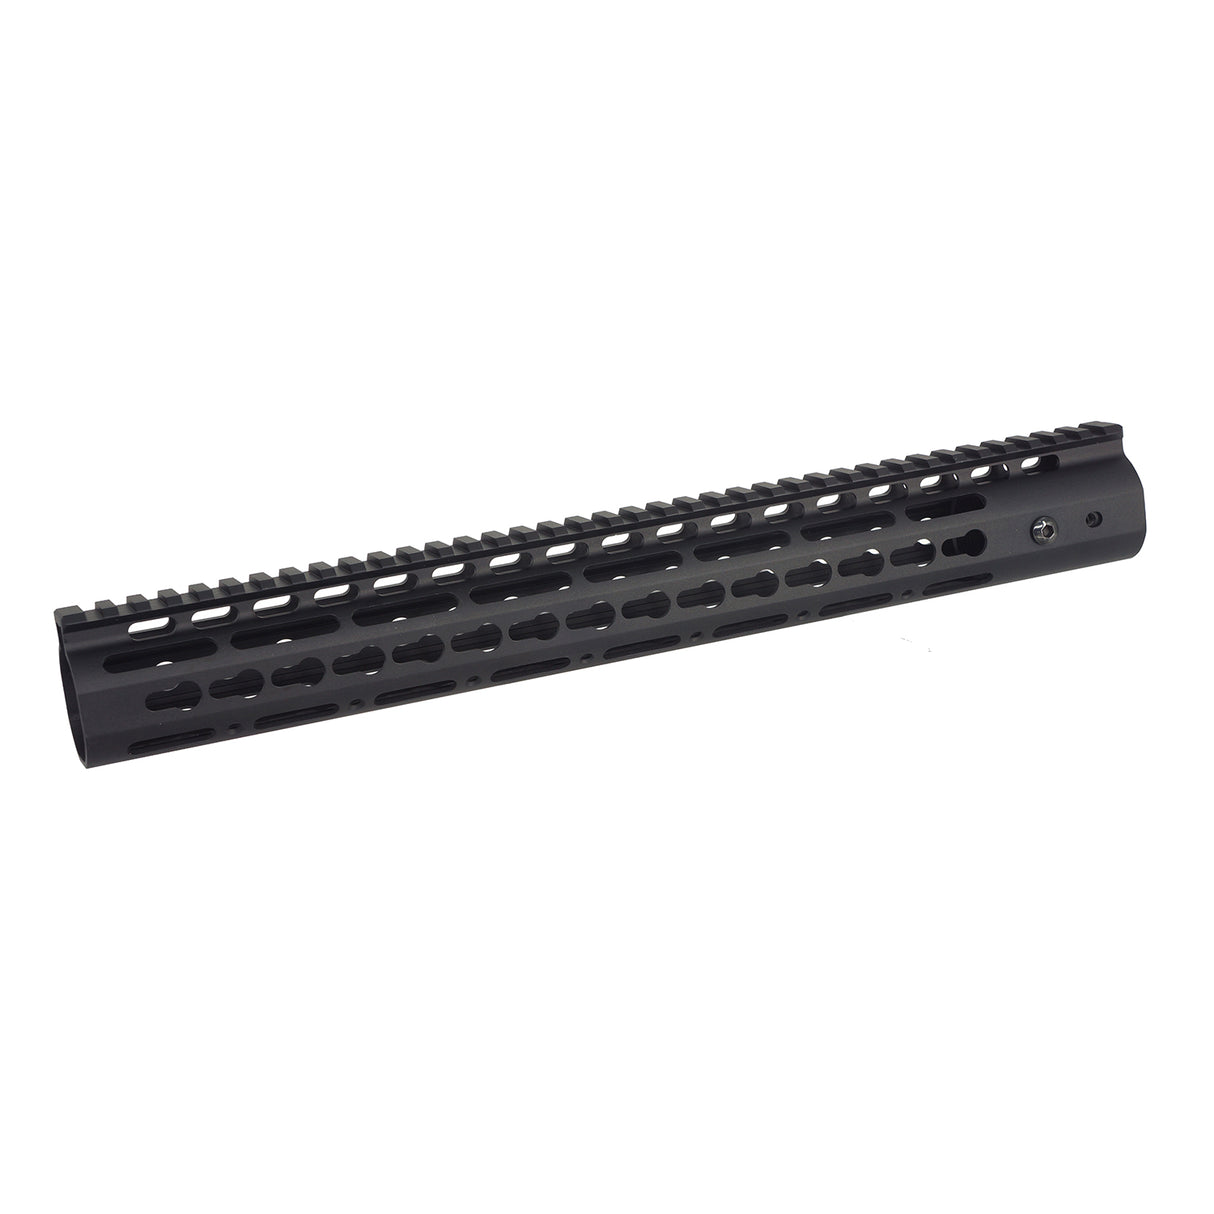 Army Force NSR Style KeyMod Handguard for M4 Series